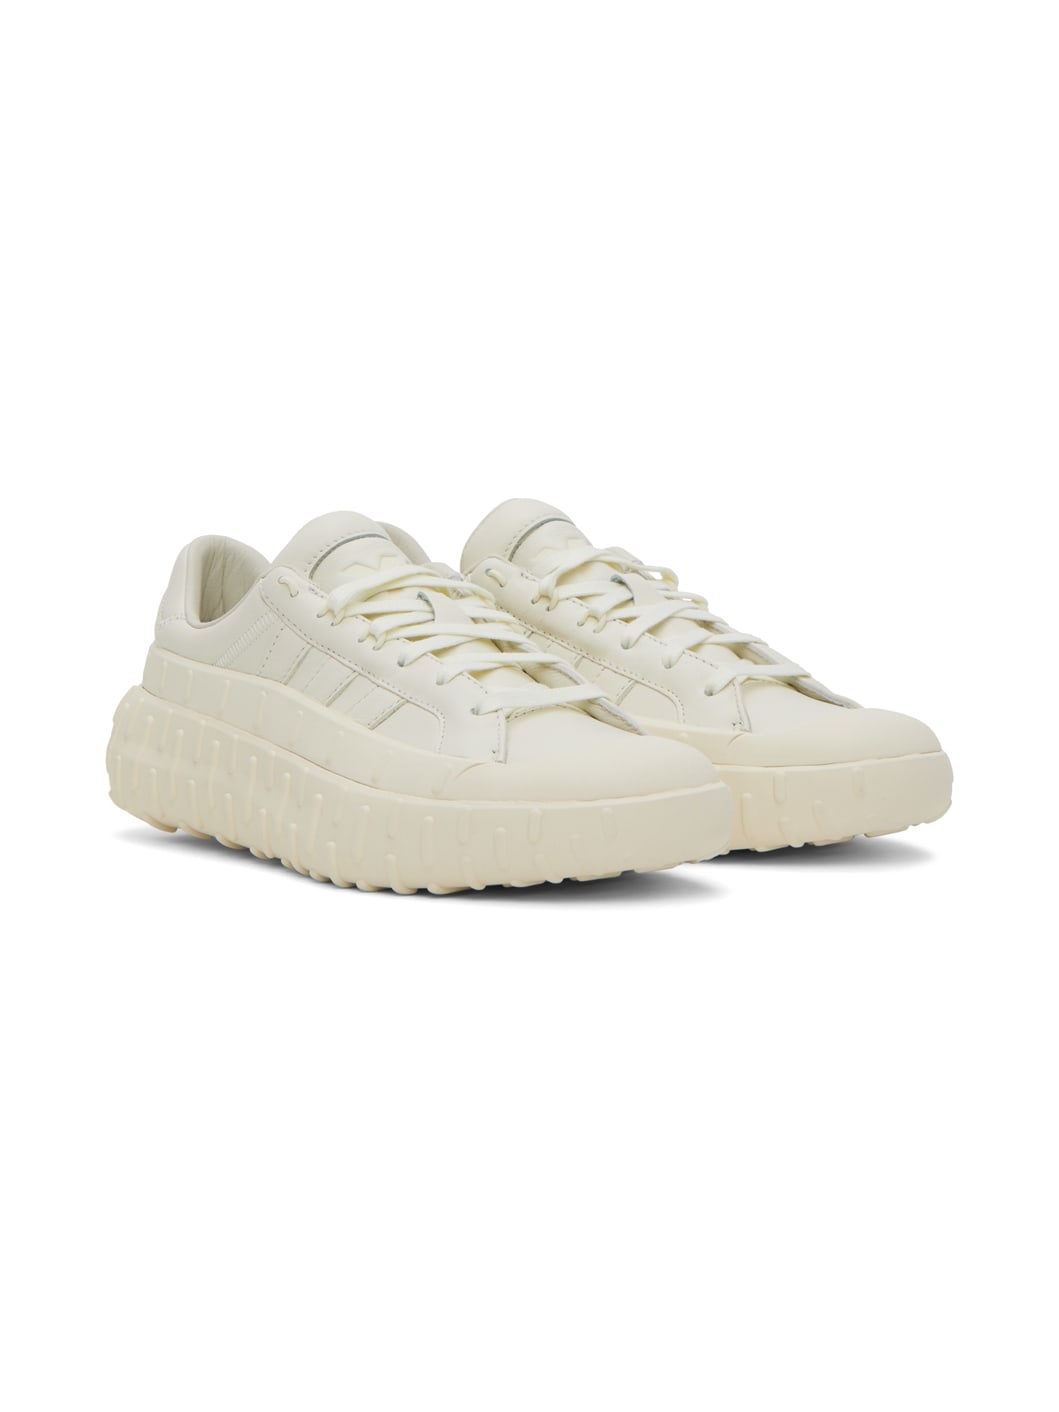 Off-White GR.1P Sneakers - 4